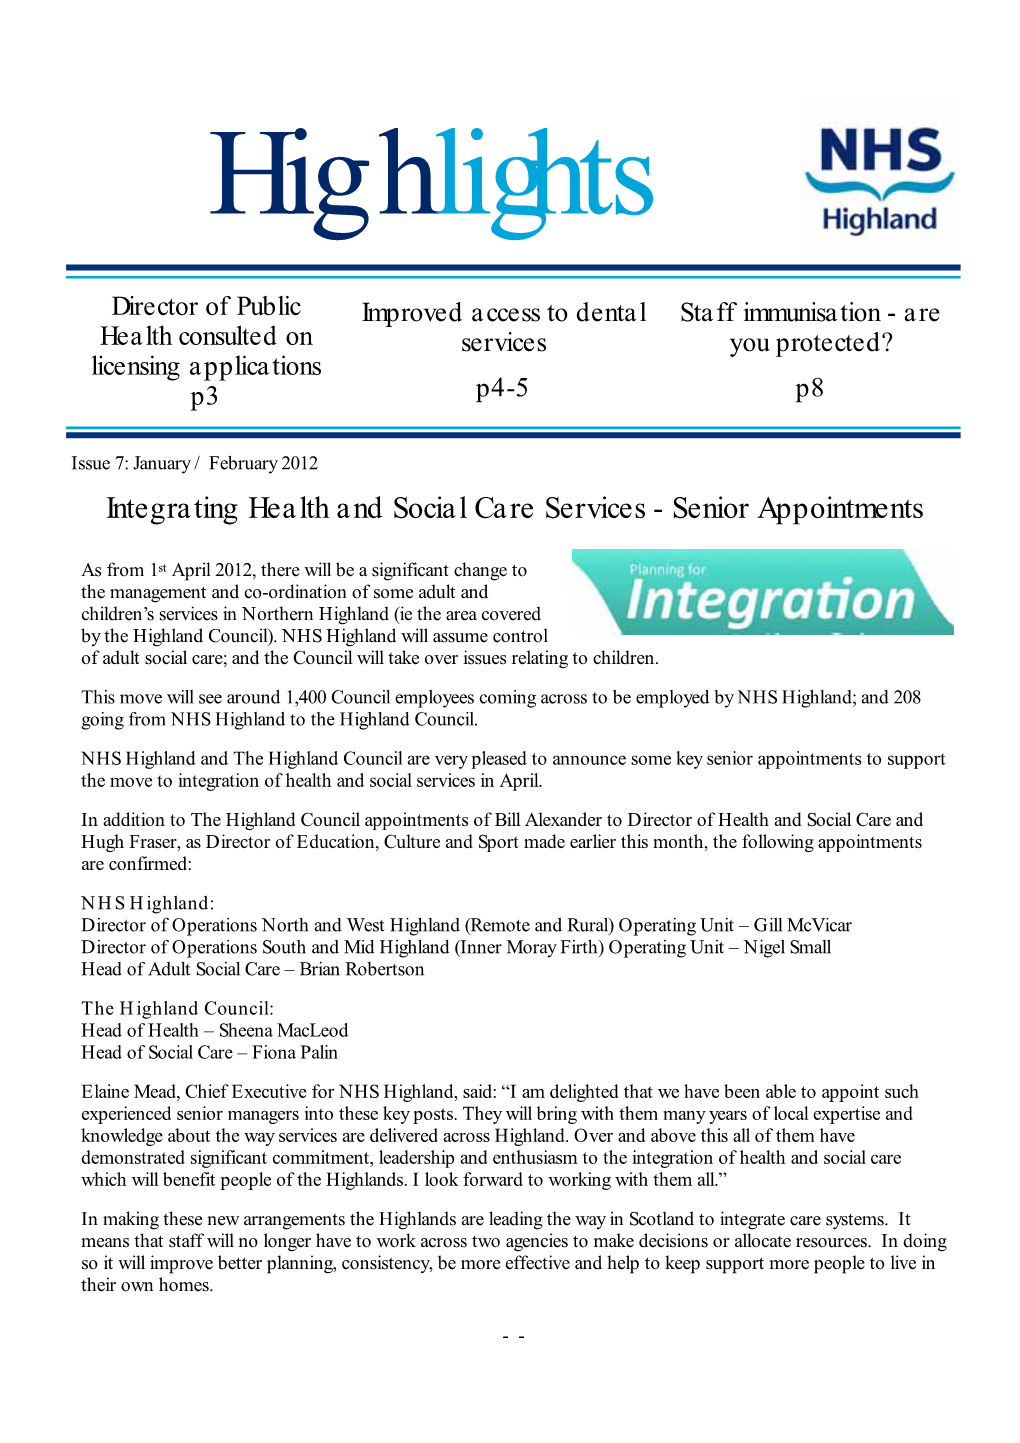 Integrating Health and Social Care Services - Senior Appointments